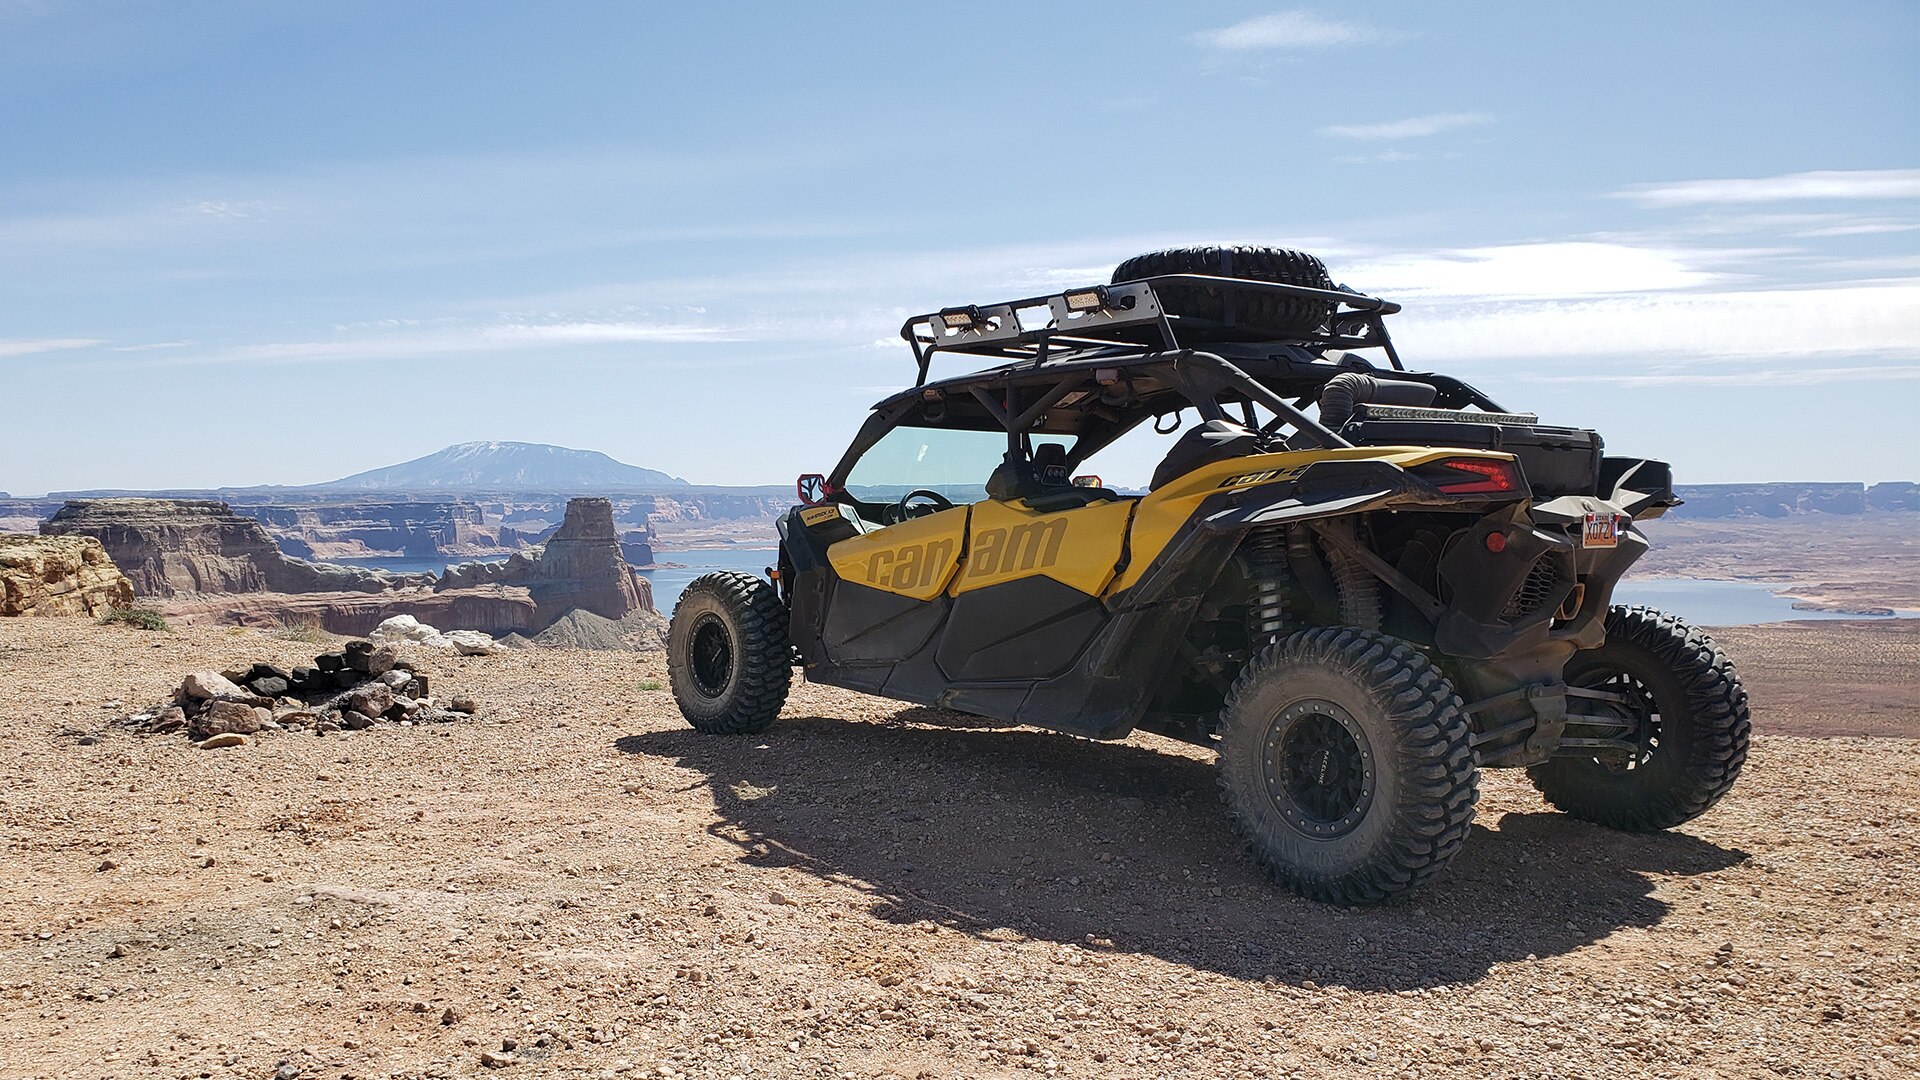 A SxS with Lake Powell in the background